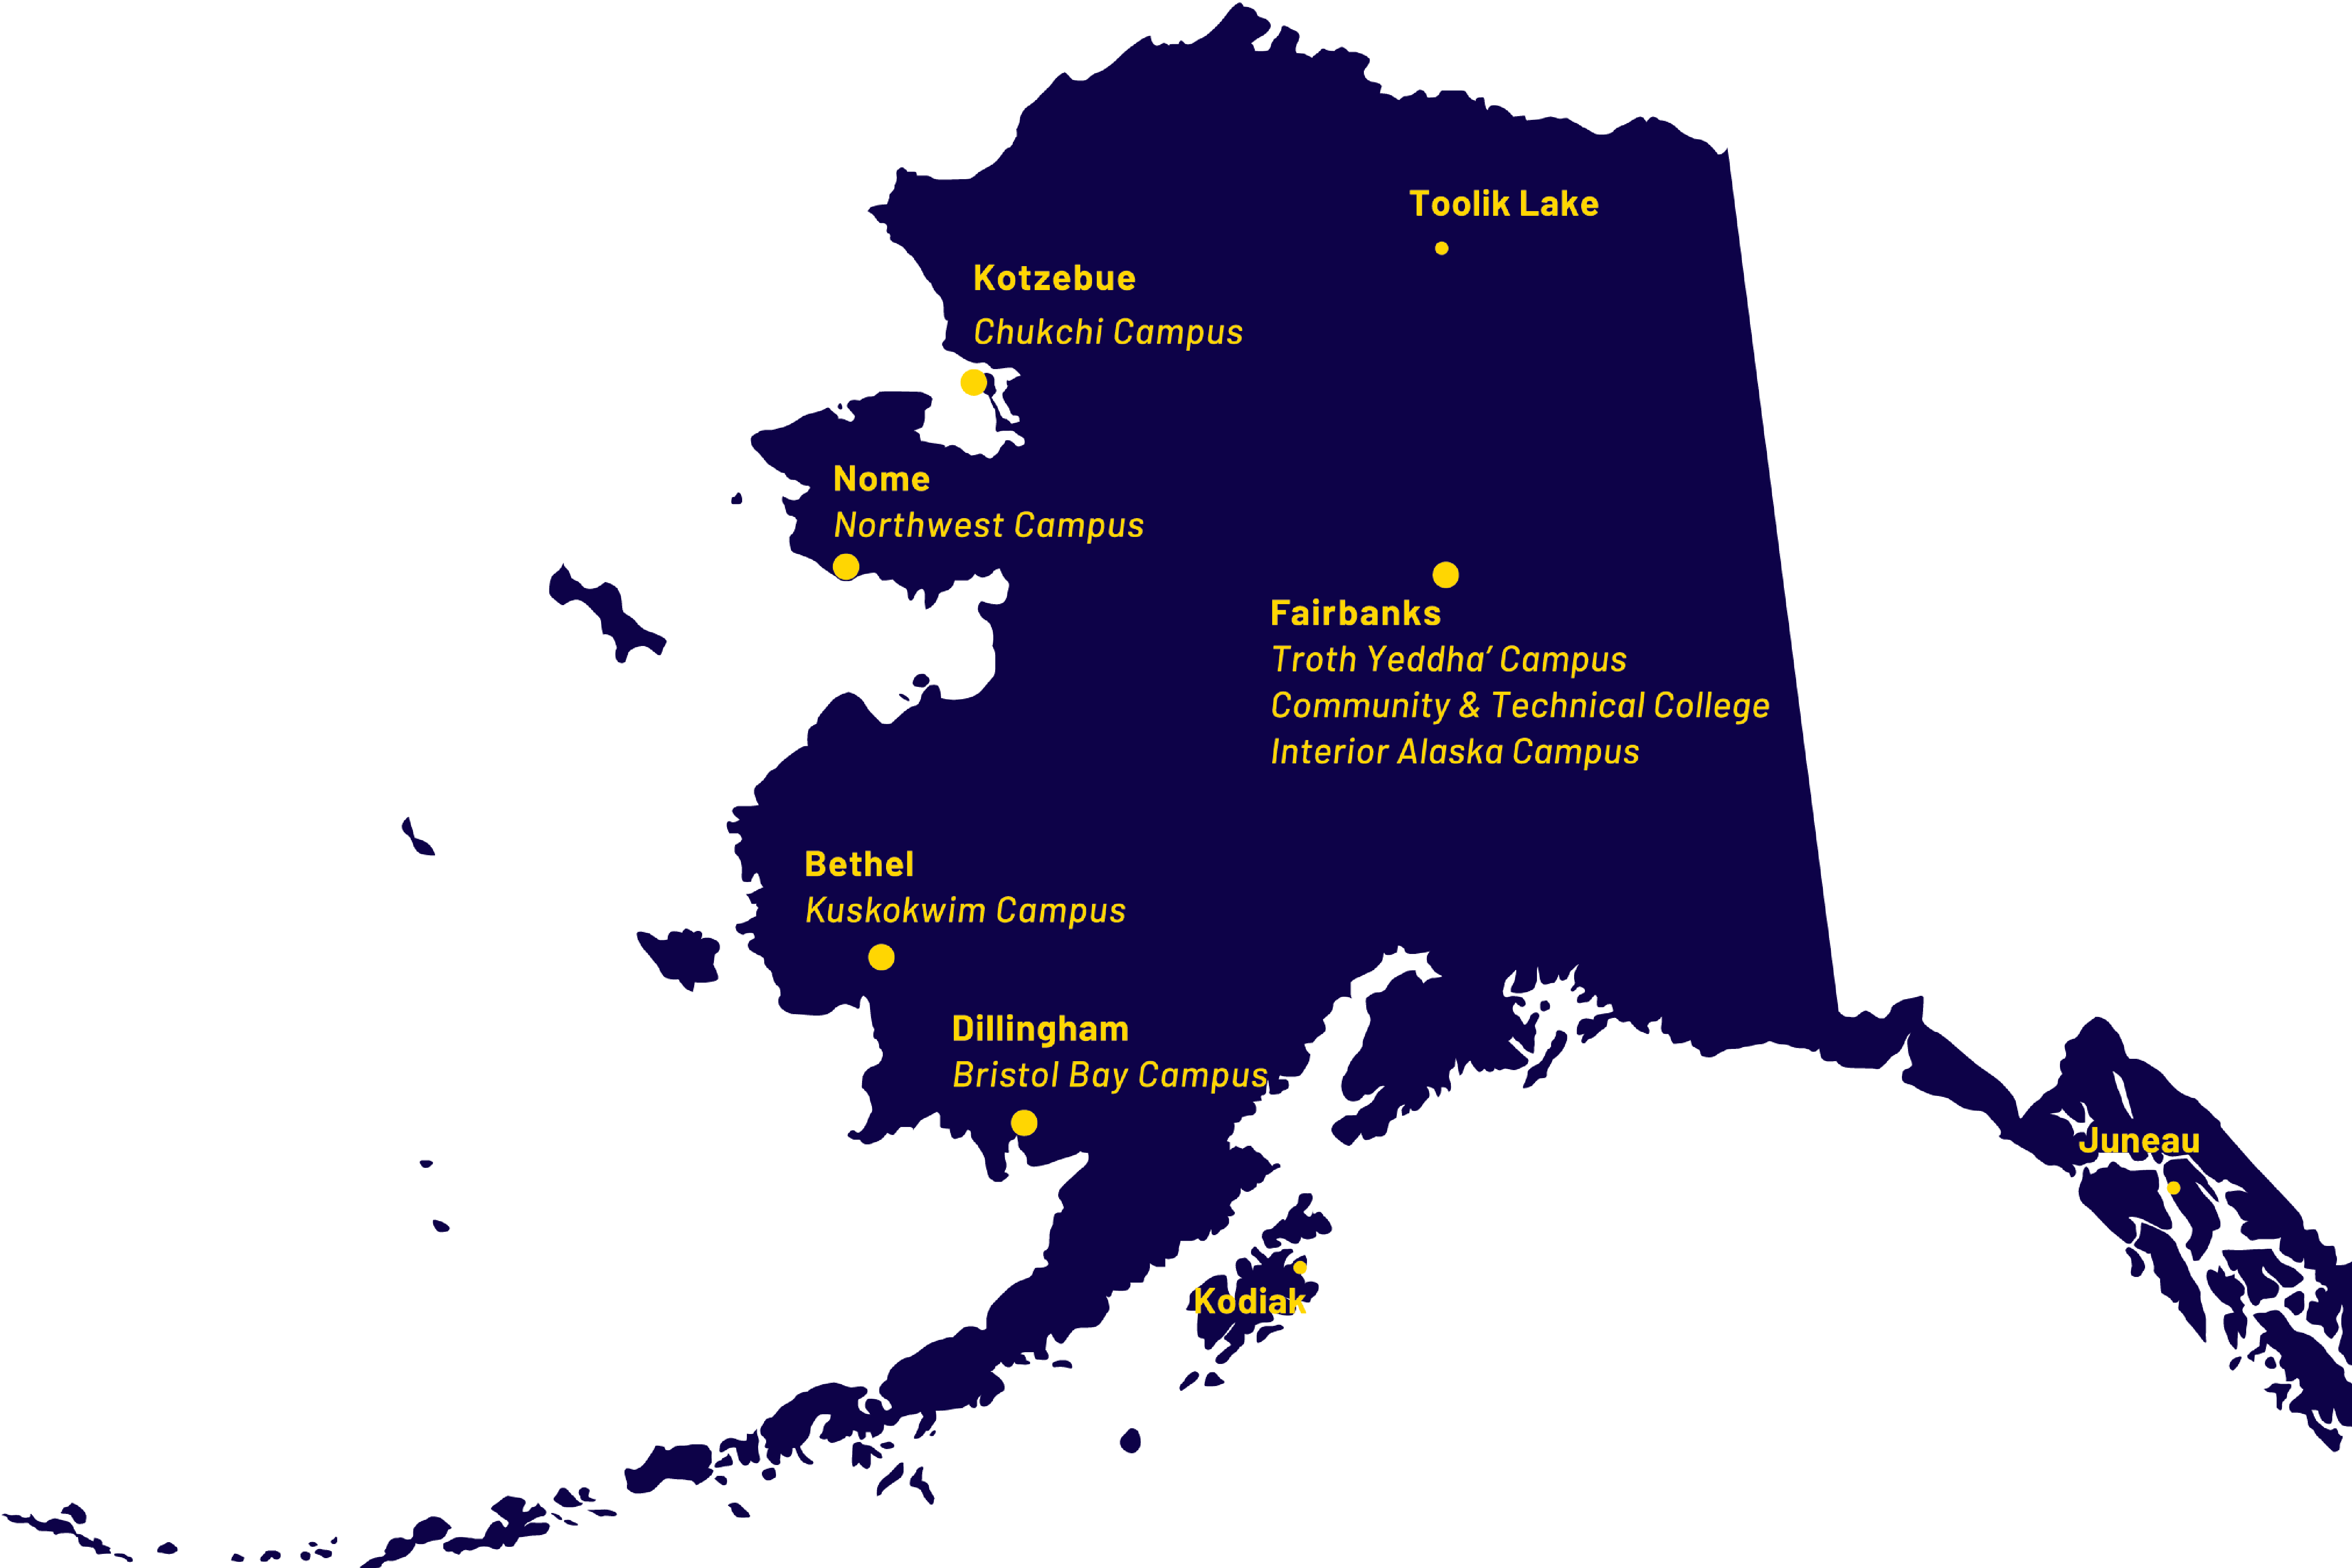 Static graphic map of Alaska showing UAF campus locations